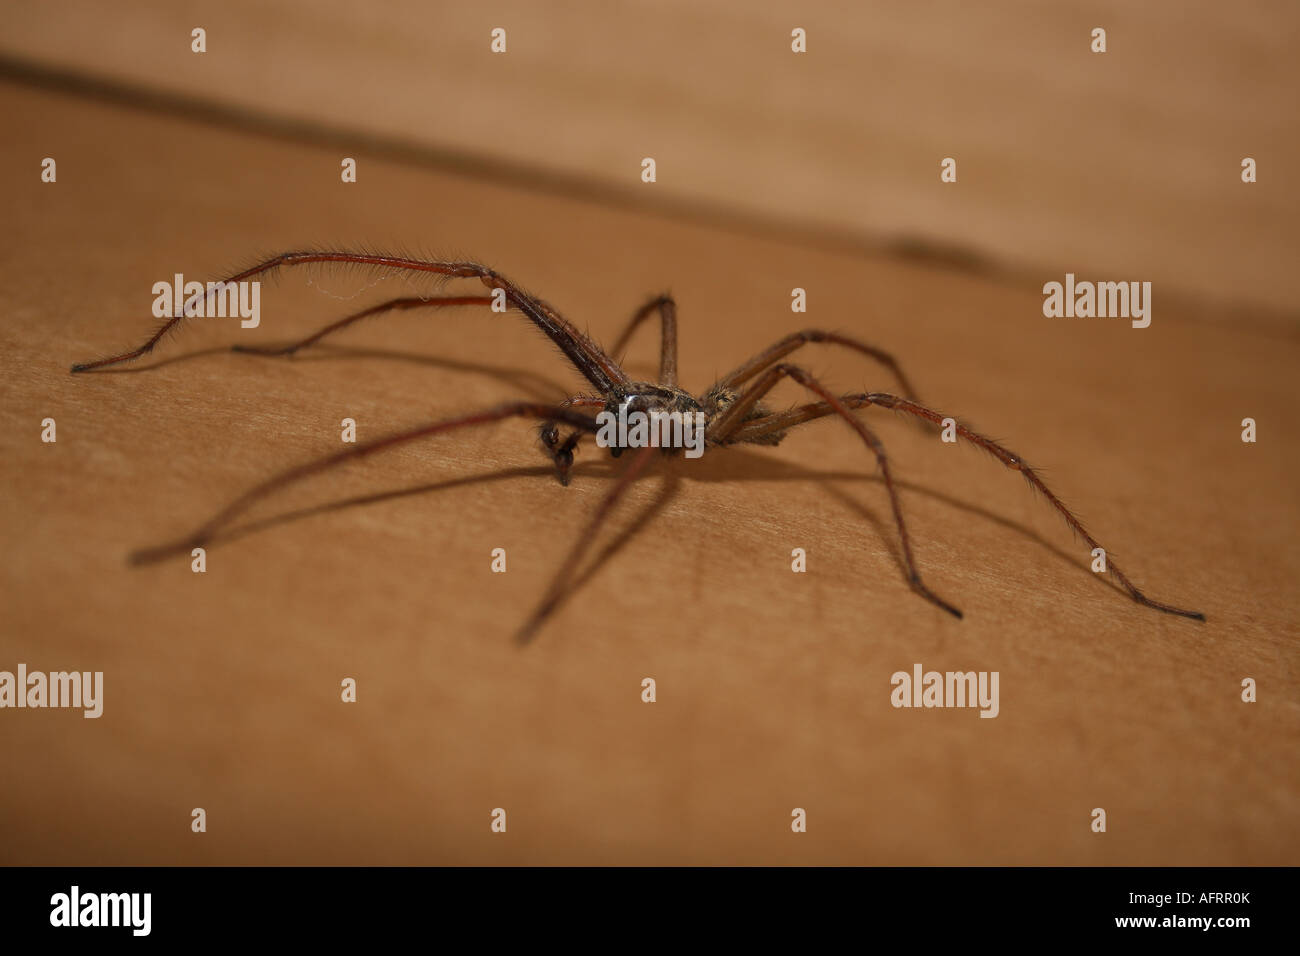 House Spider Tegenaria duellica spider on wall Stock Photo